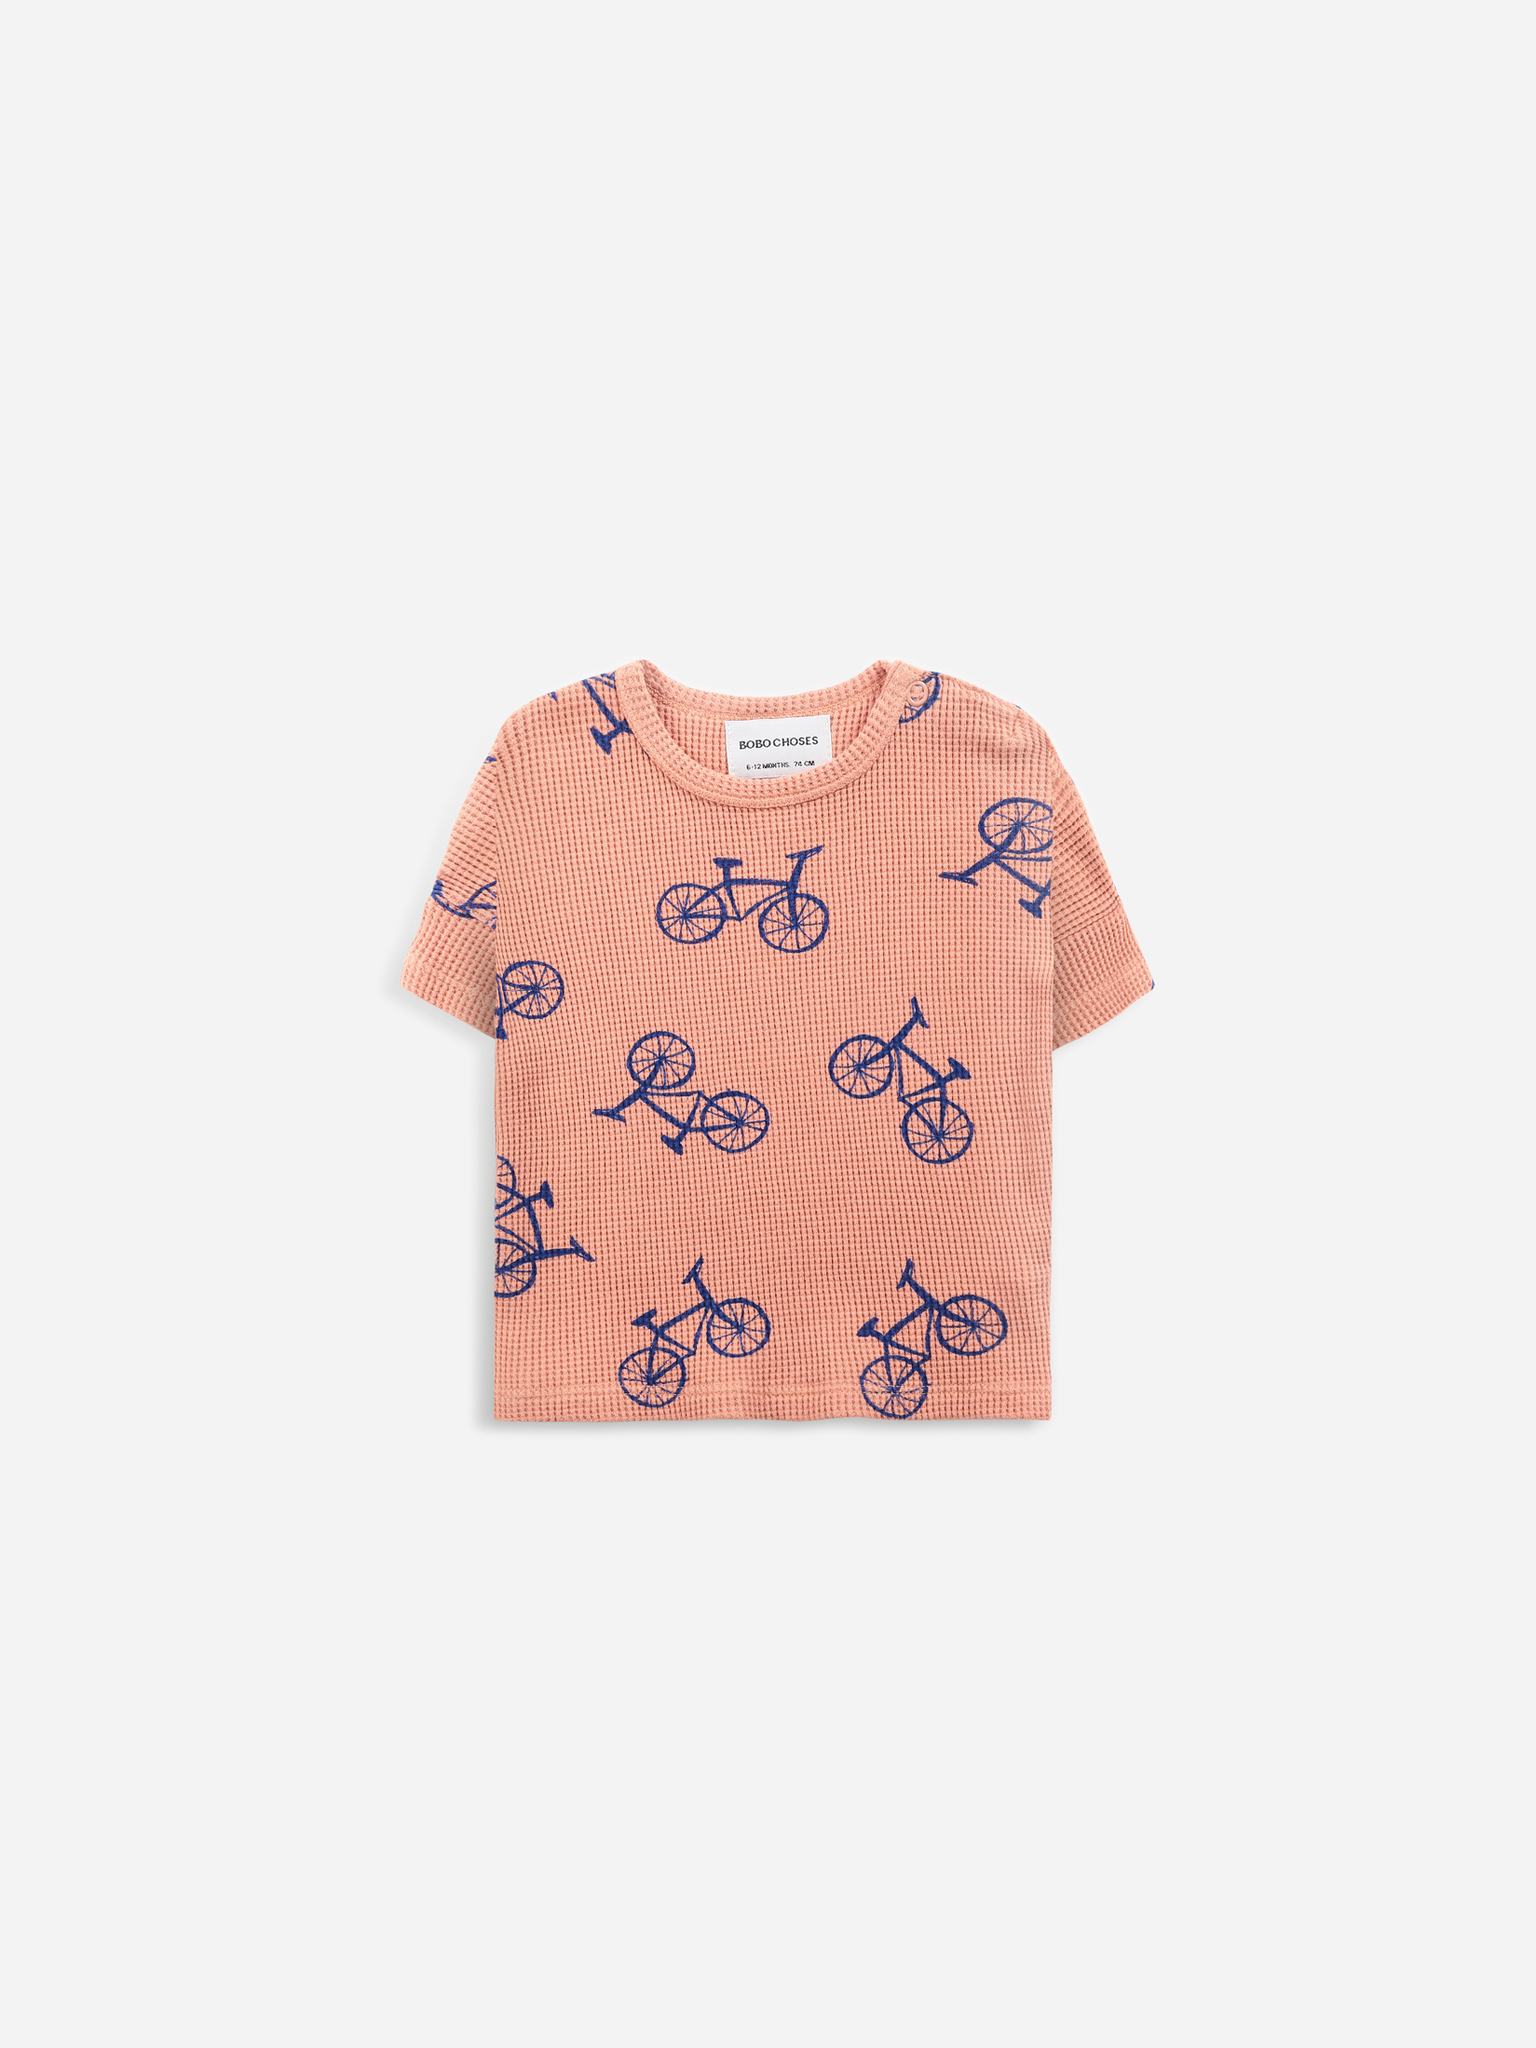 Bobo Choses Bicycle All Over Short Sleeve T-Shirt